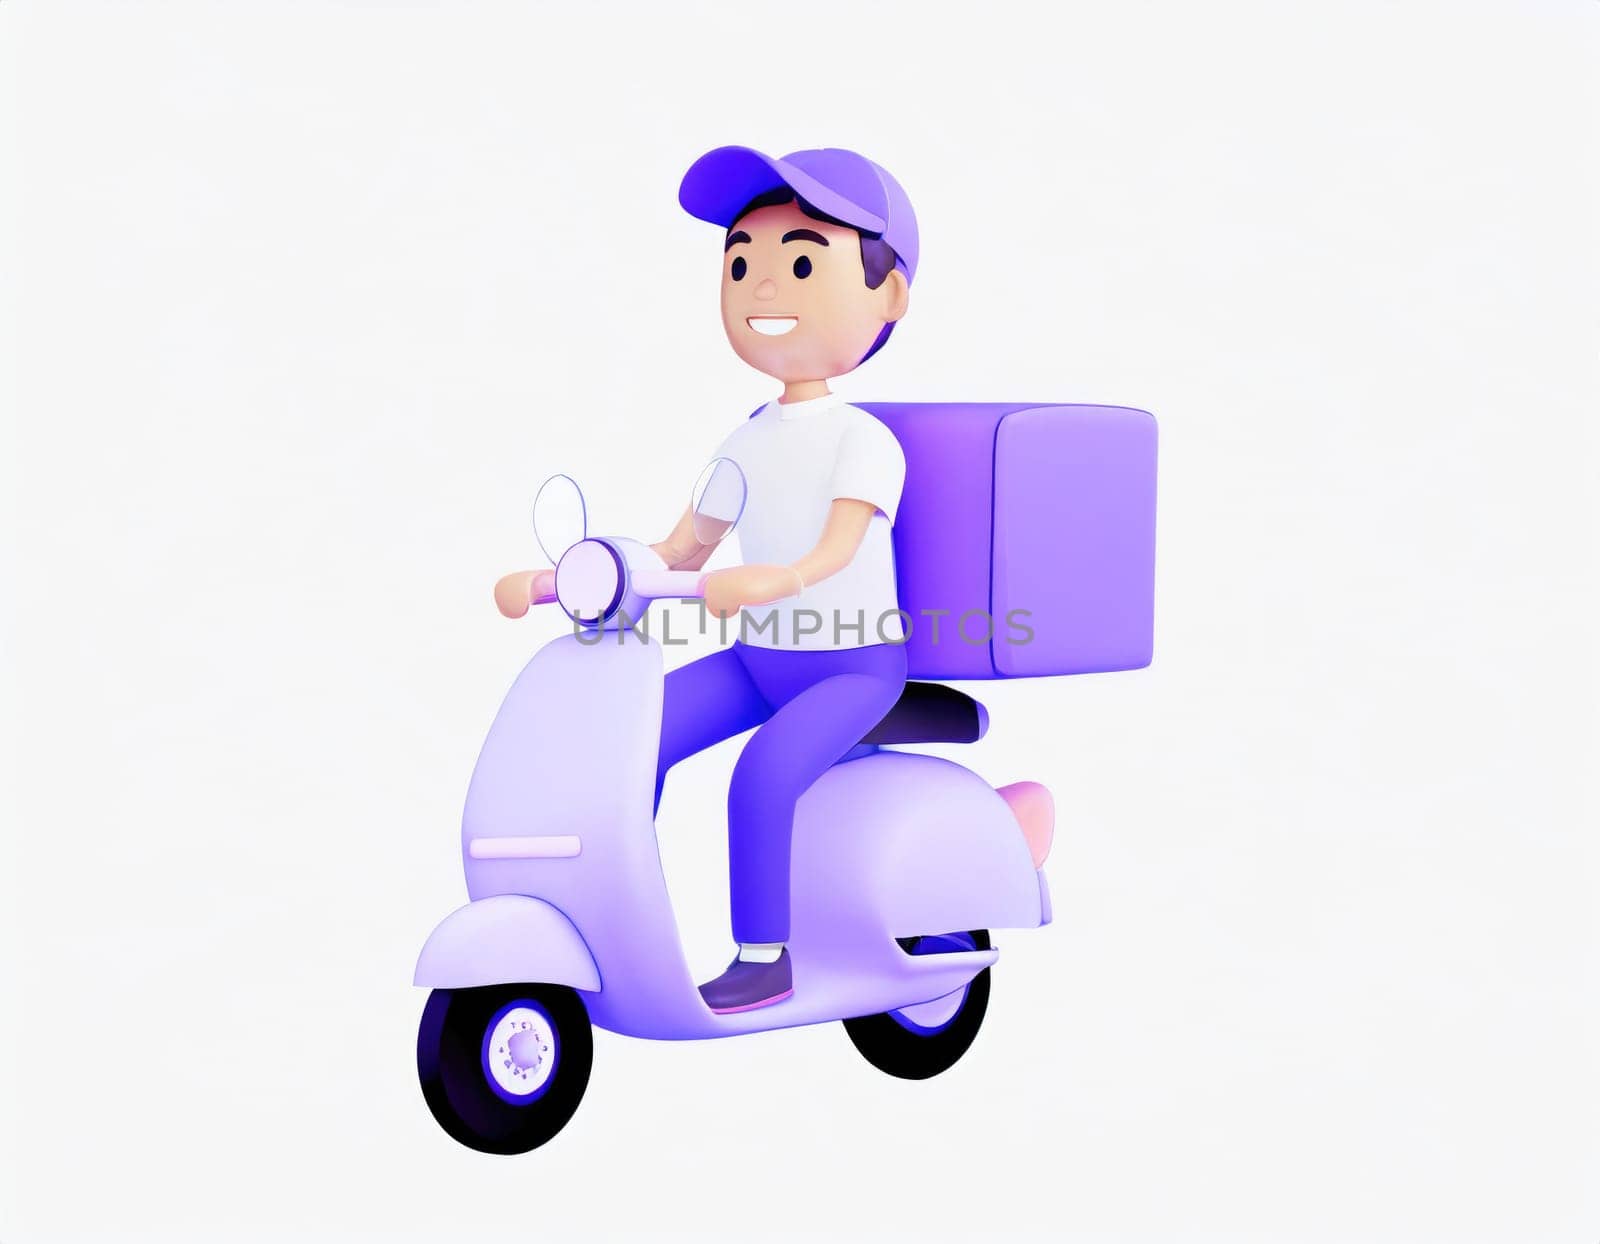 3D Character Delivery man riding a motorcycle with delivery box.